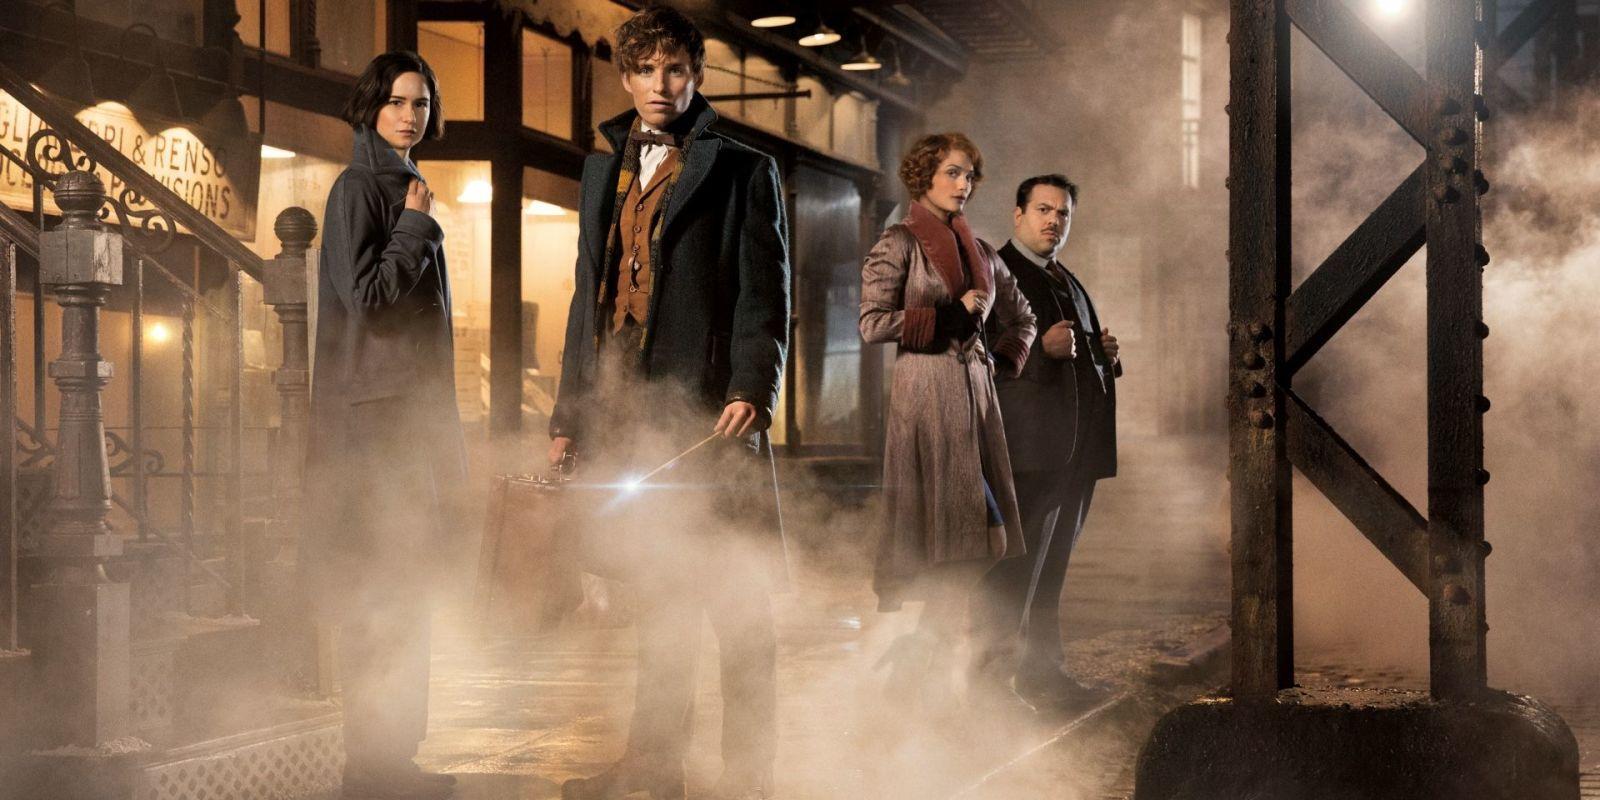 Exclusive new image from Fantastic Beasts And Where To Find Them